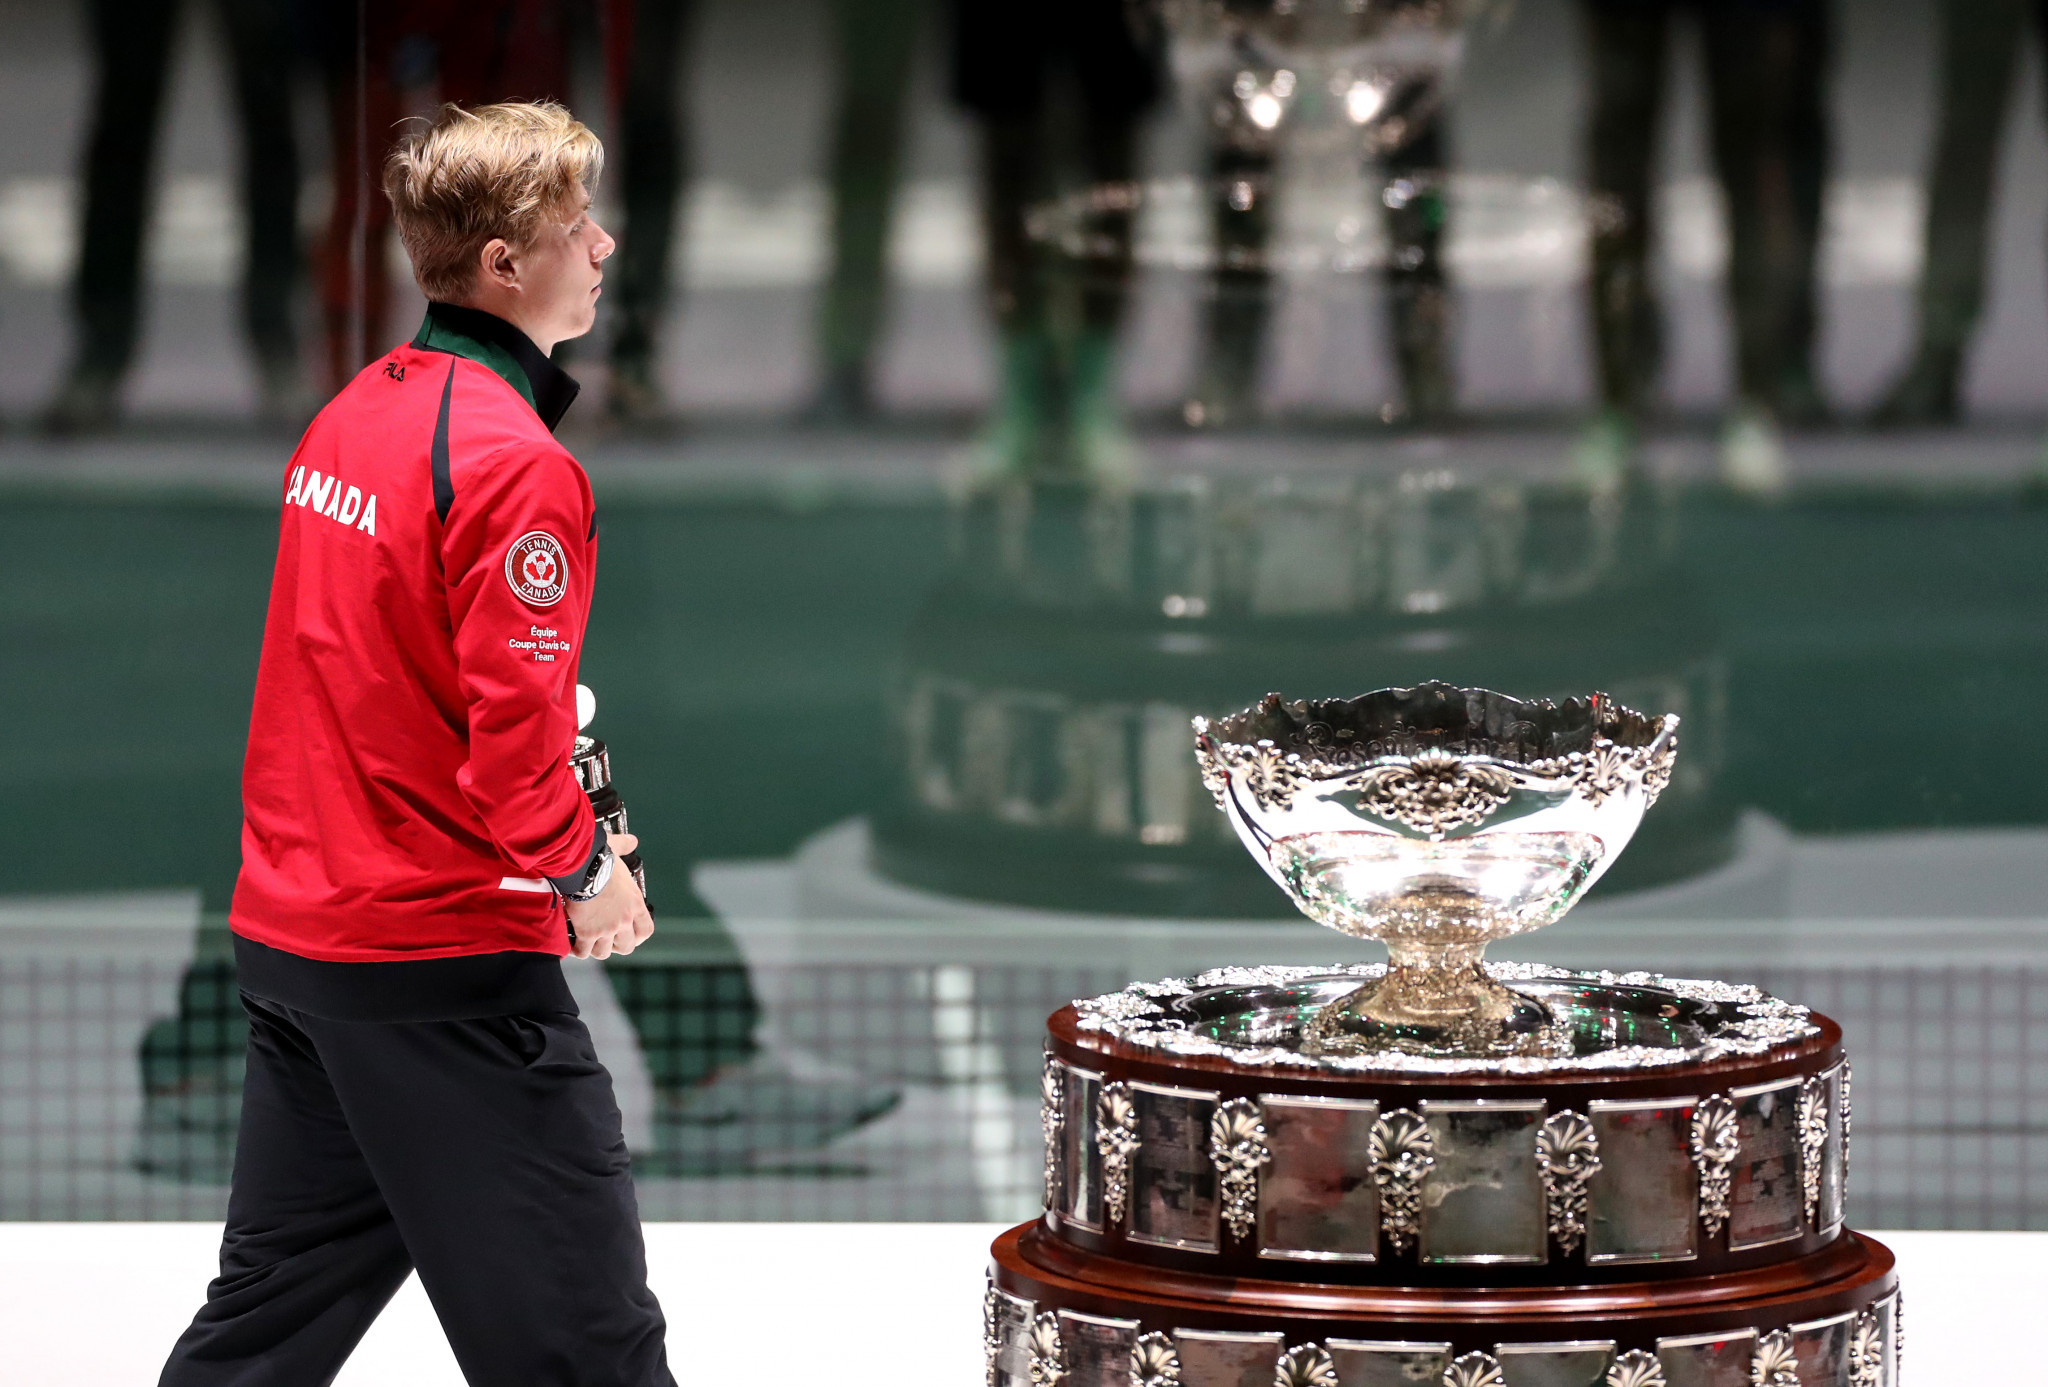 China are now unable to qualify for the 2021 Davis Cup Finals ©Getty Images